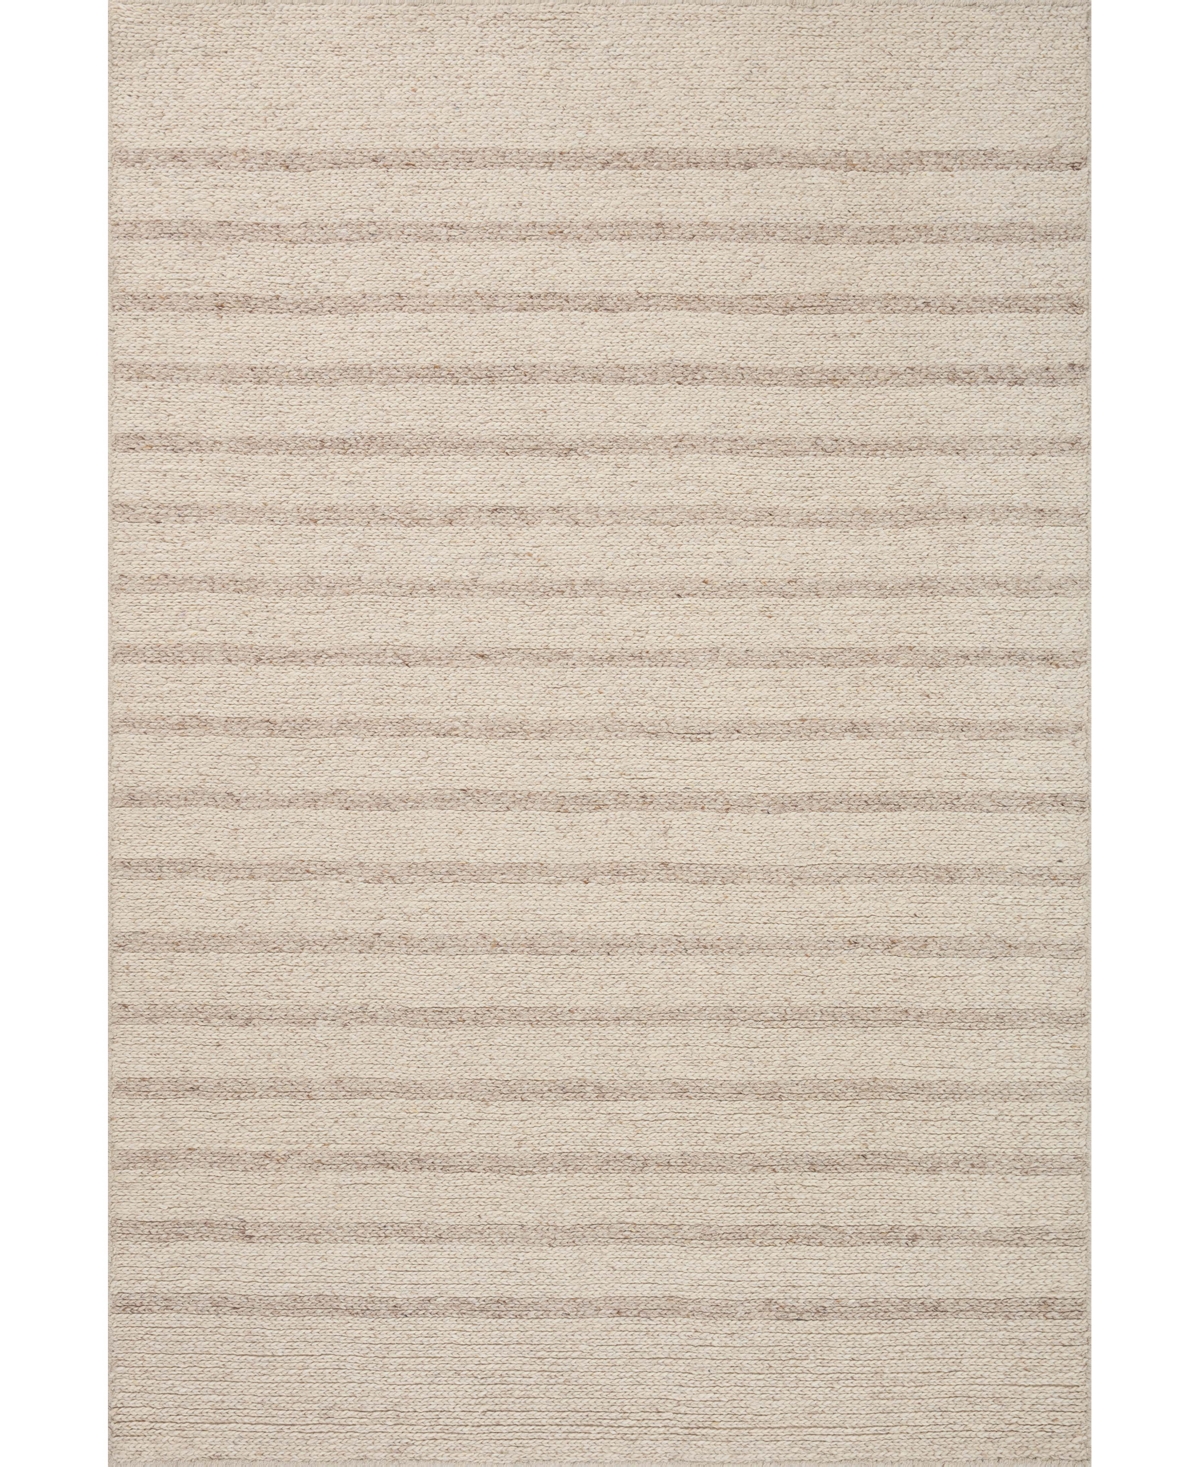 Magnolia Home By Joanna Gaines X Loloi Ashby Ash-01 2'3" X 3'9" Area Rug In Oatmeal